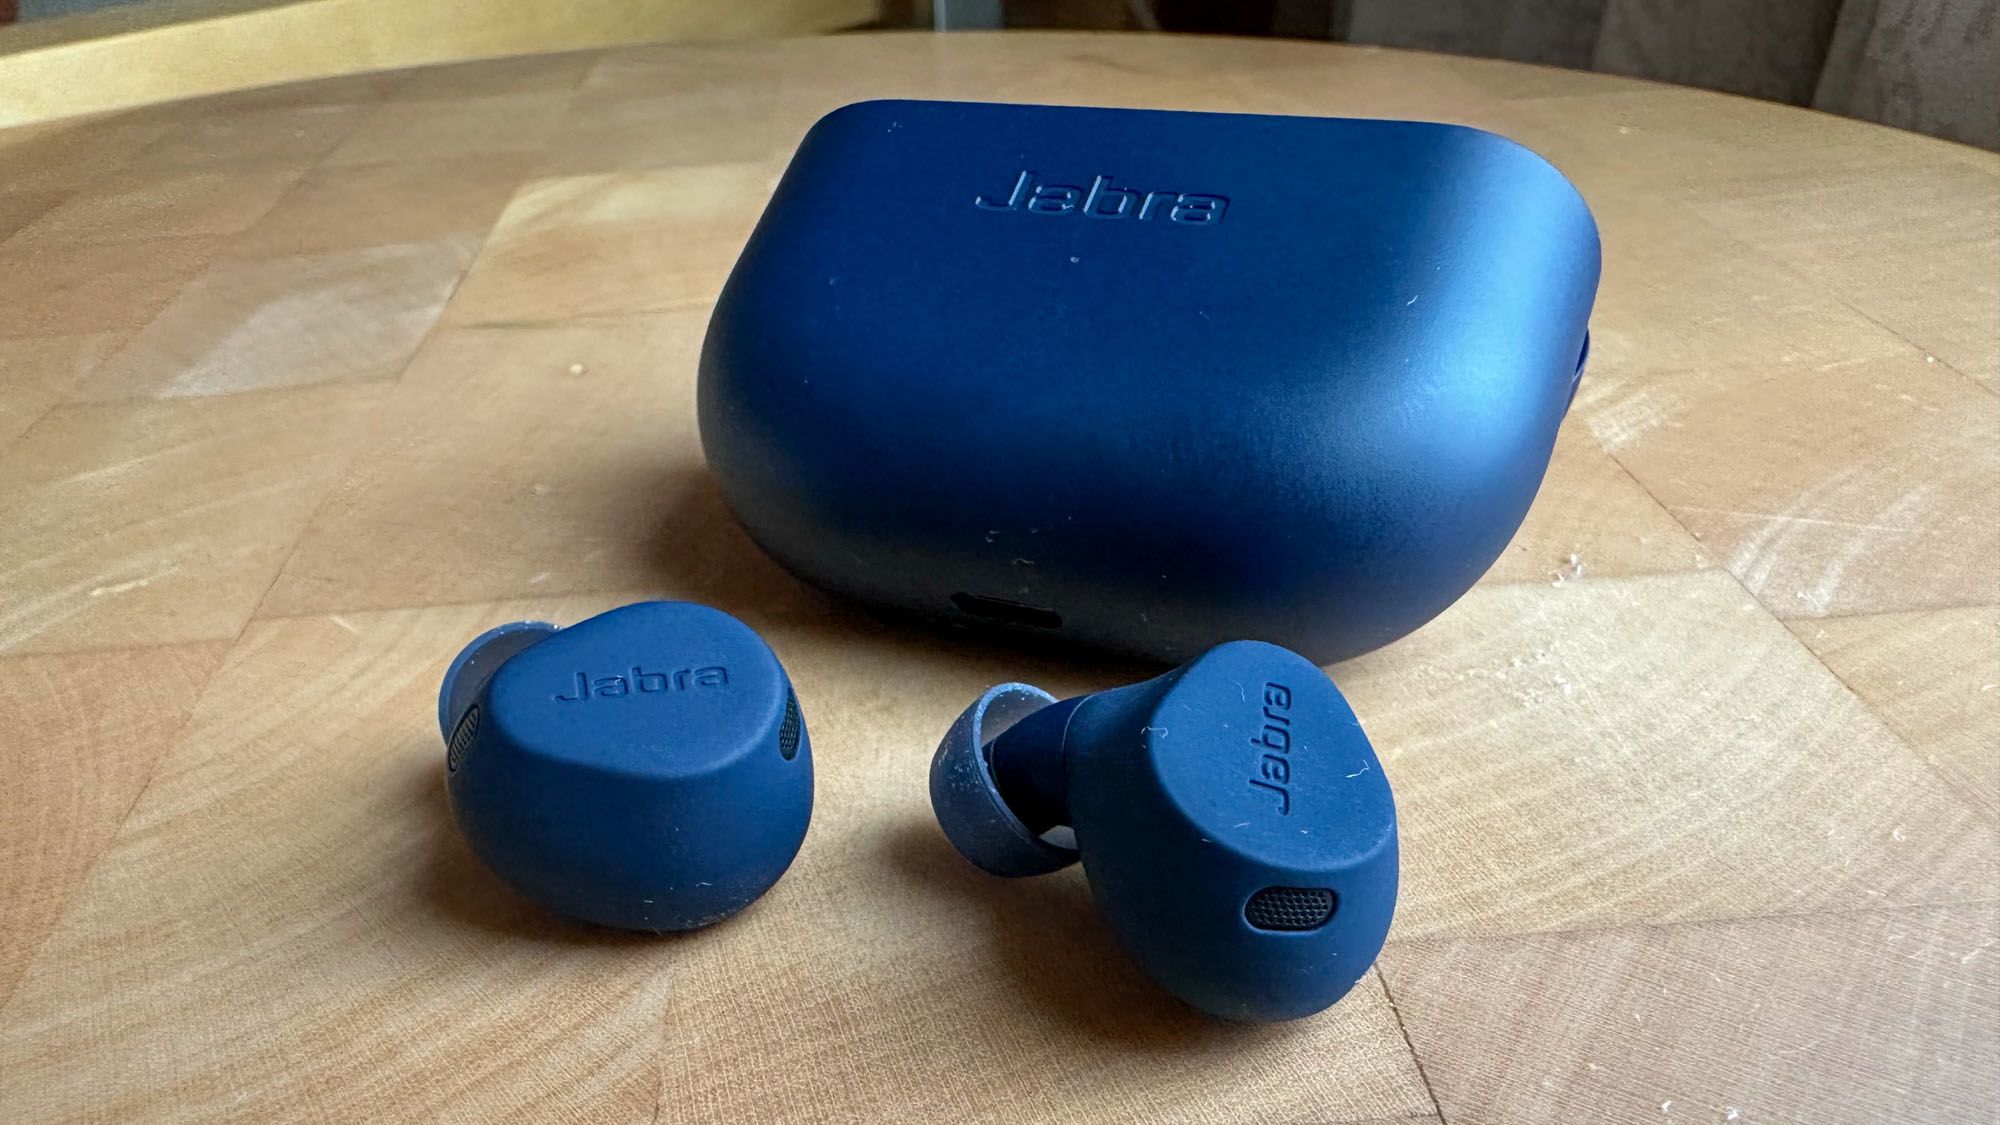 Jabra Elite 8 Active - Best and Most Advanced Sports Wireless Bluetooth  Earbuds with Comfortable Secure Fit, Military Grade Durability, Active  Noise